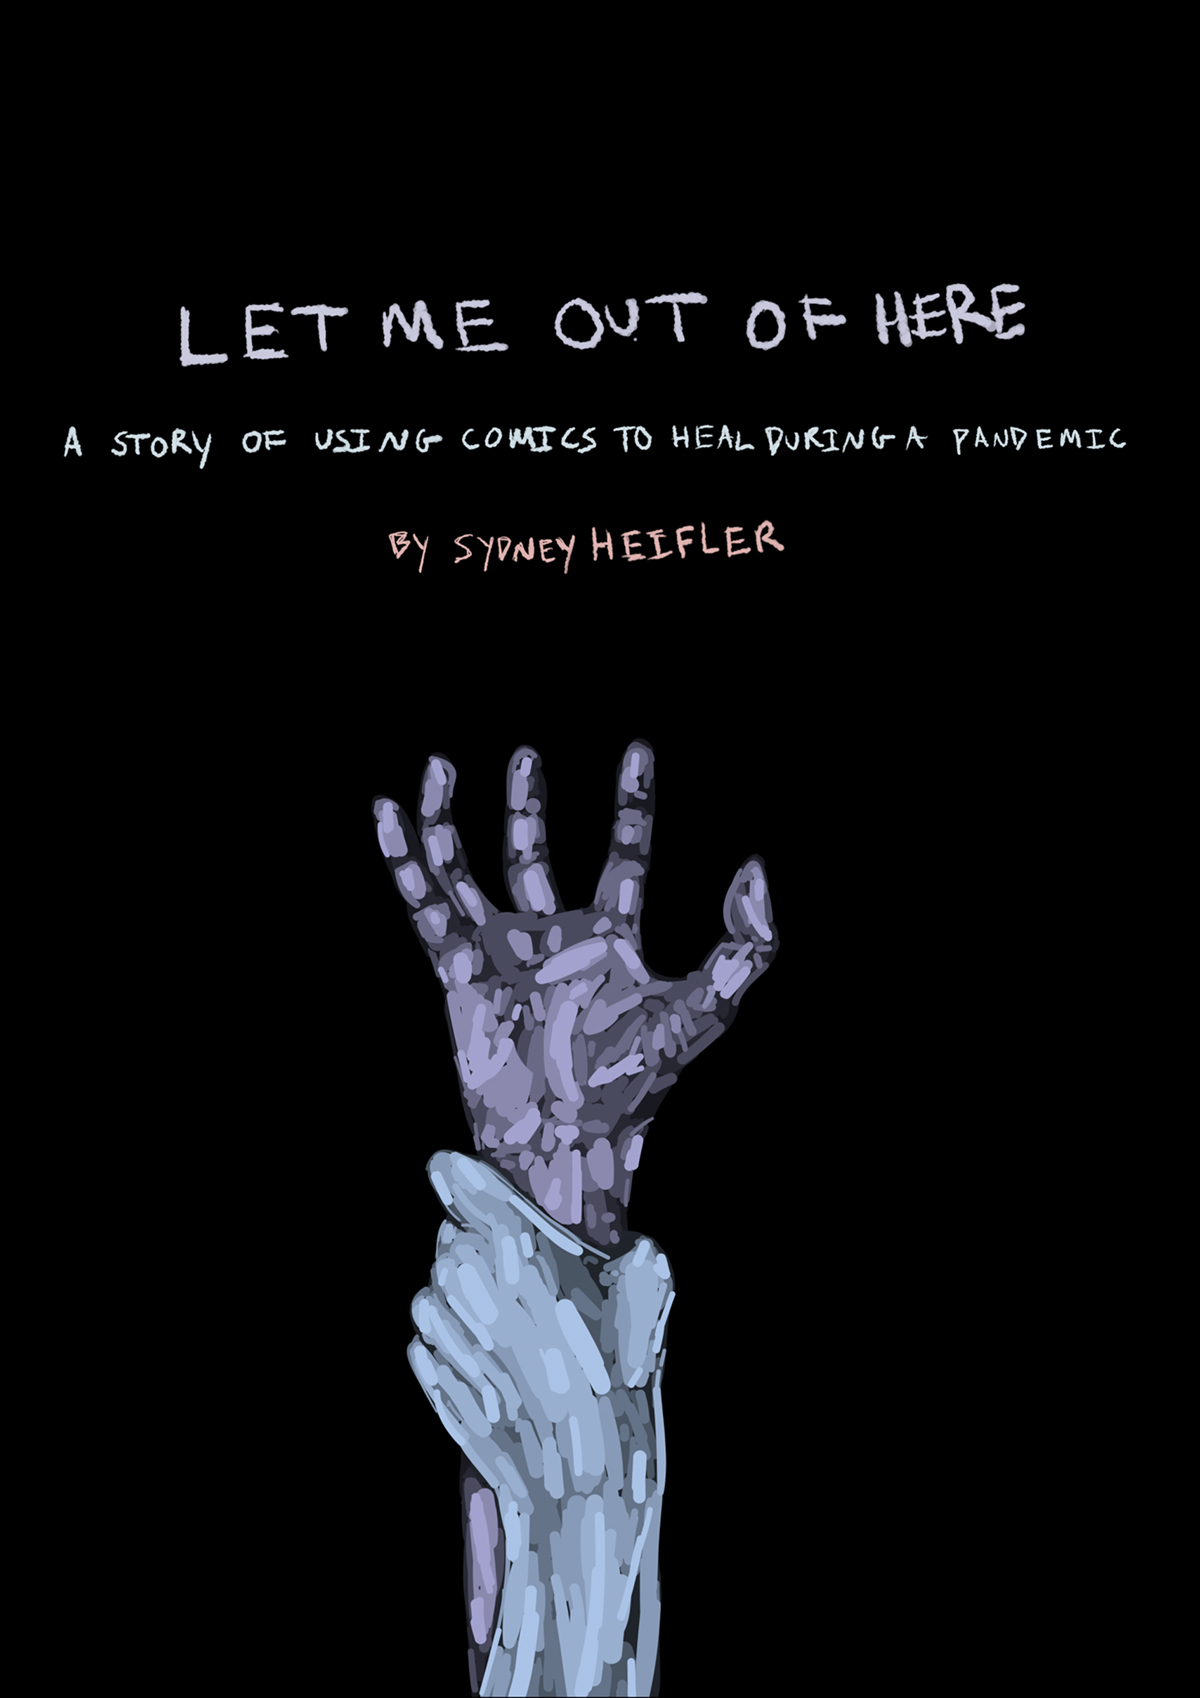 Let Me Out of Here: A Story of Using Comics to Heal During the Pandemic